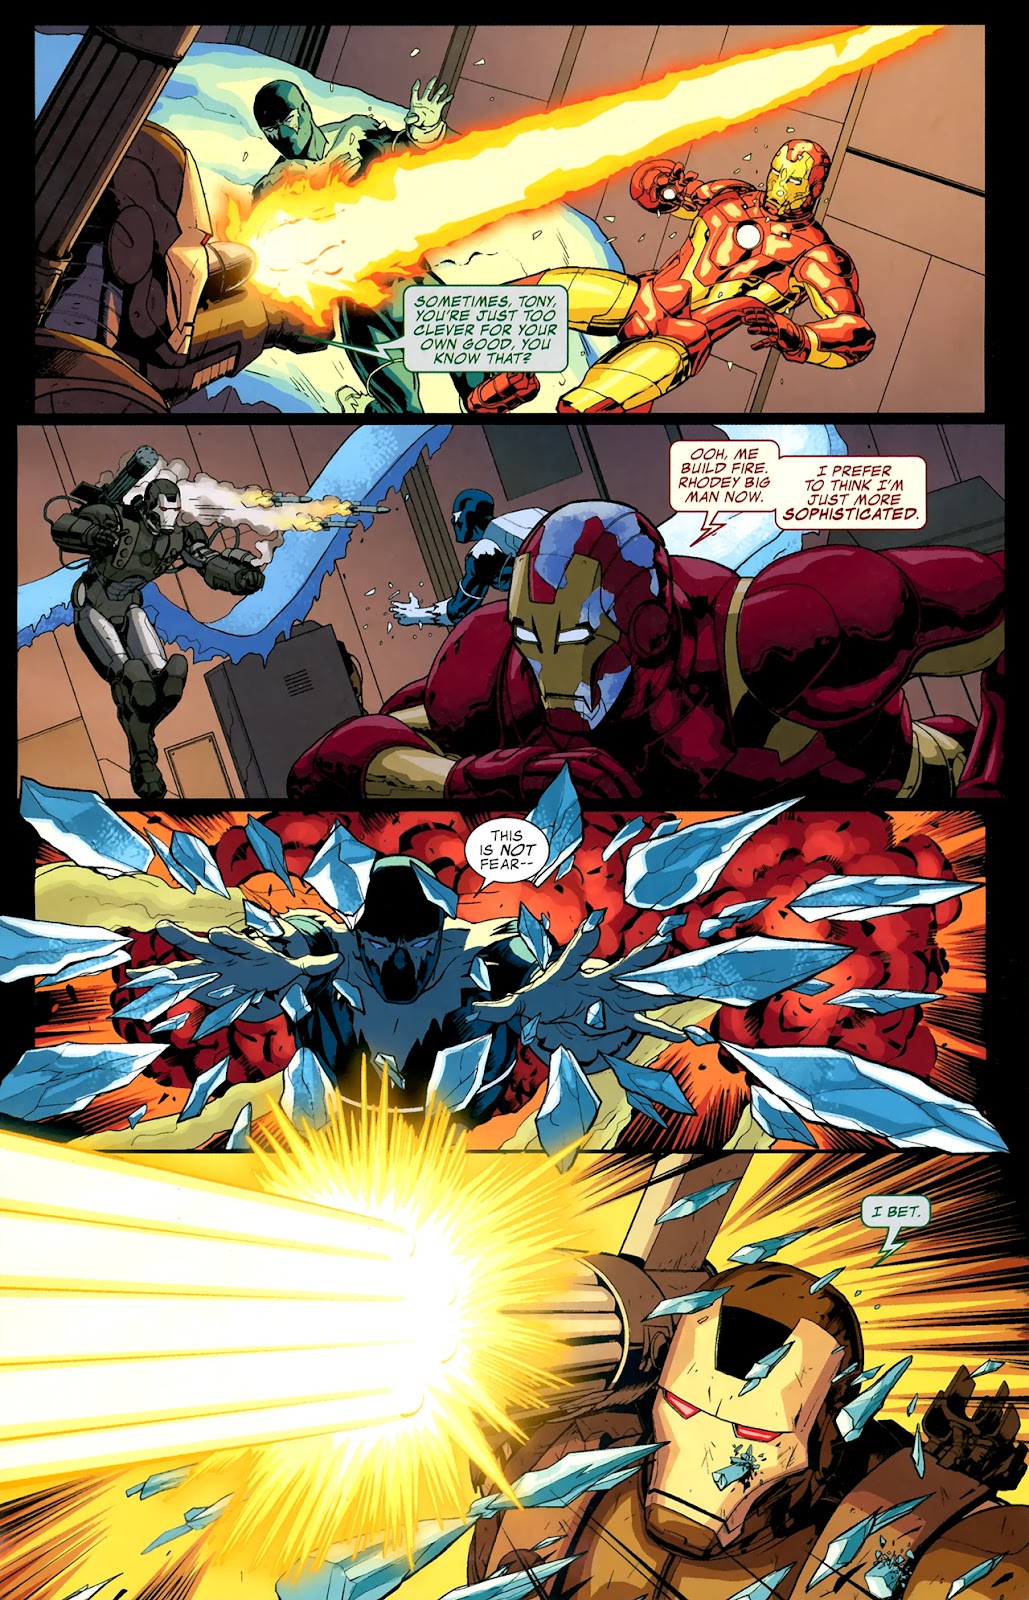 Iron Man 2.0 issue 1 - Page 8